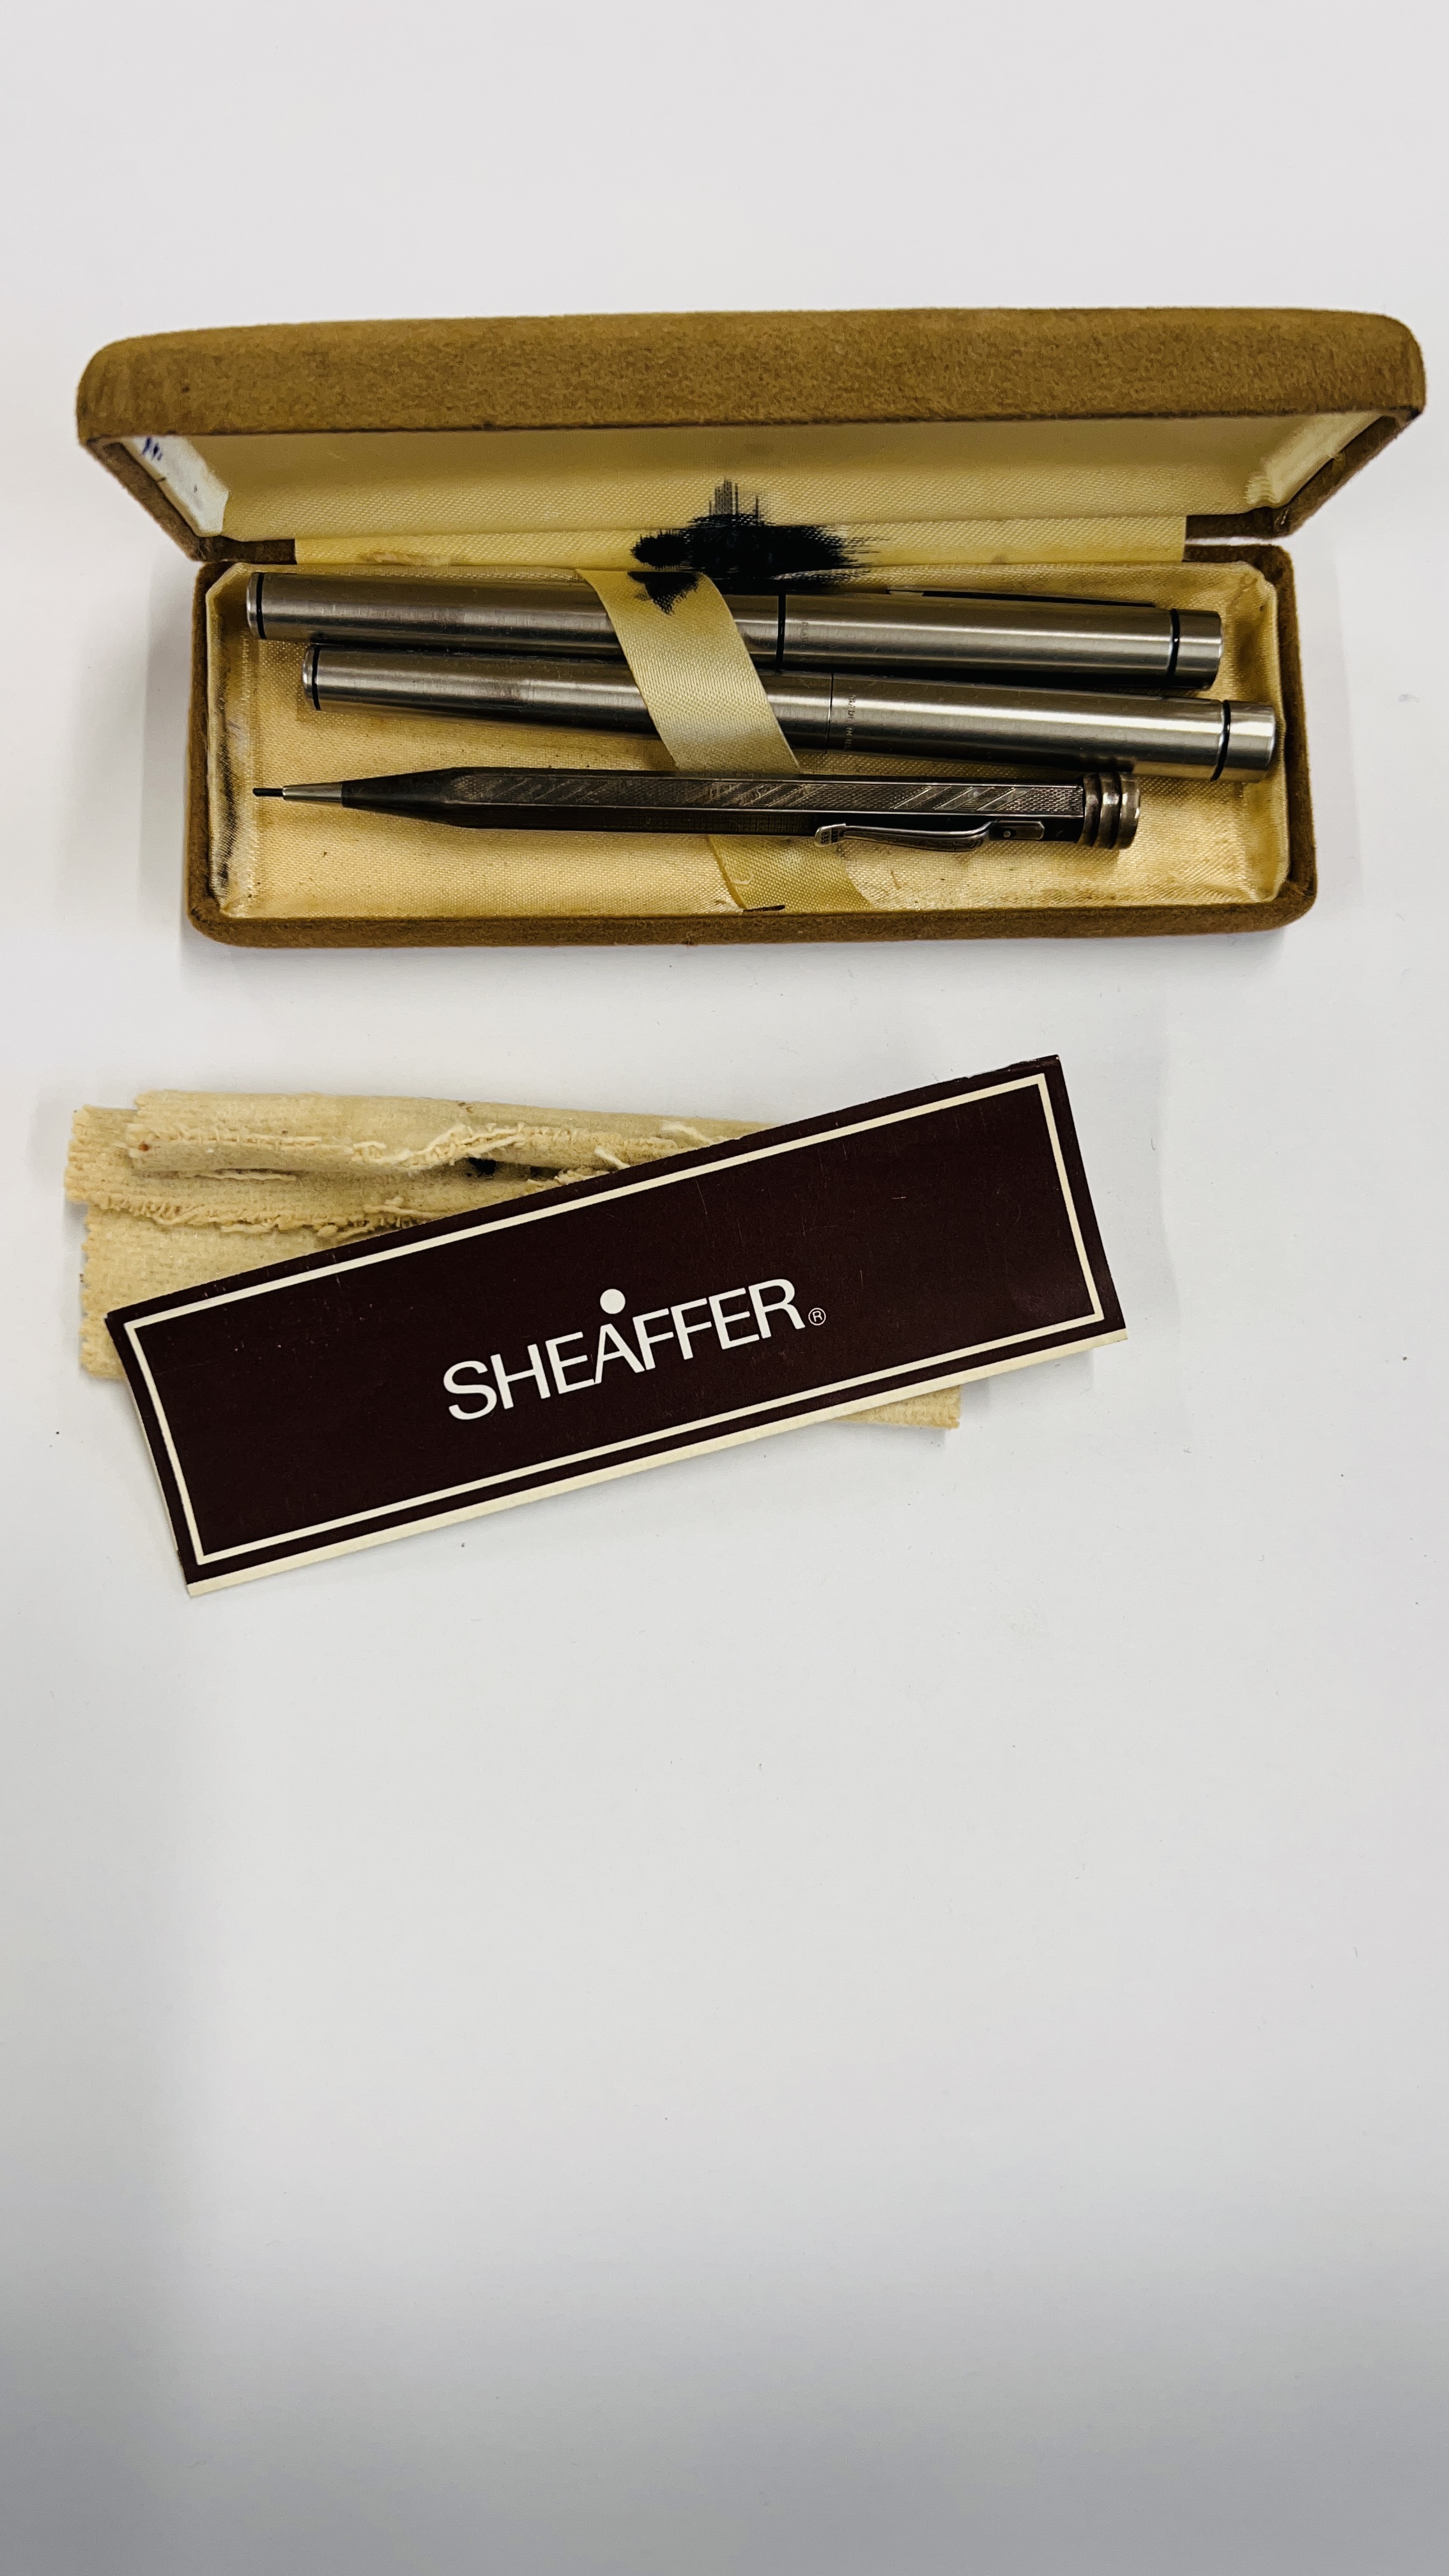 TWO SHEAFFER FOUNTAIN PENS AND BOX ALONG WITH A VINTAGE PROPELLING PENCIL MARKED "SARASTRO" 835.